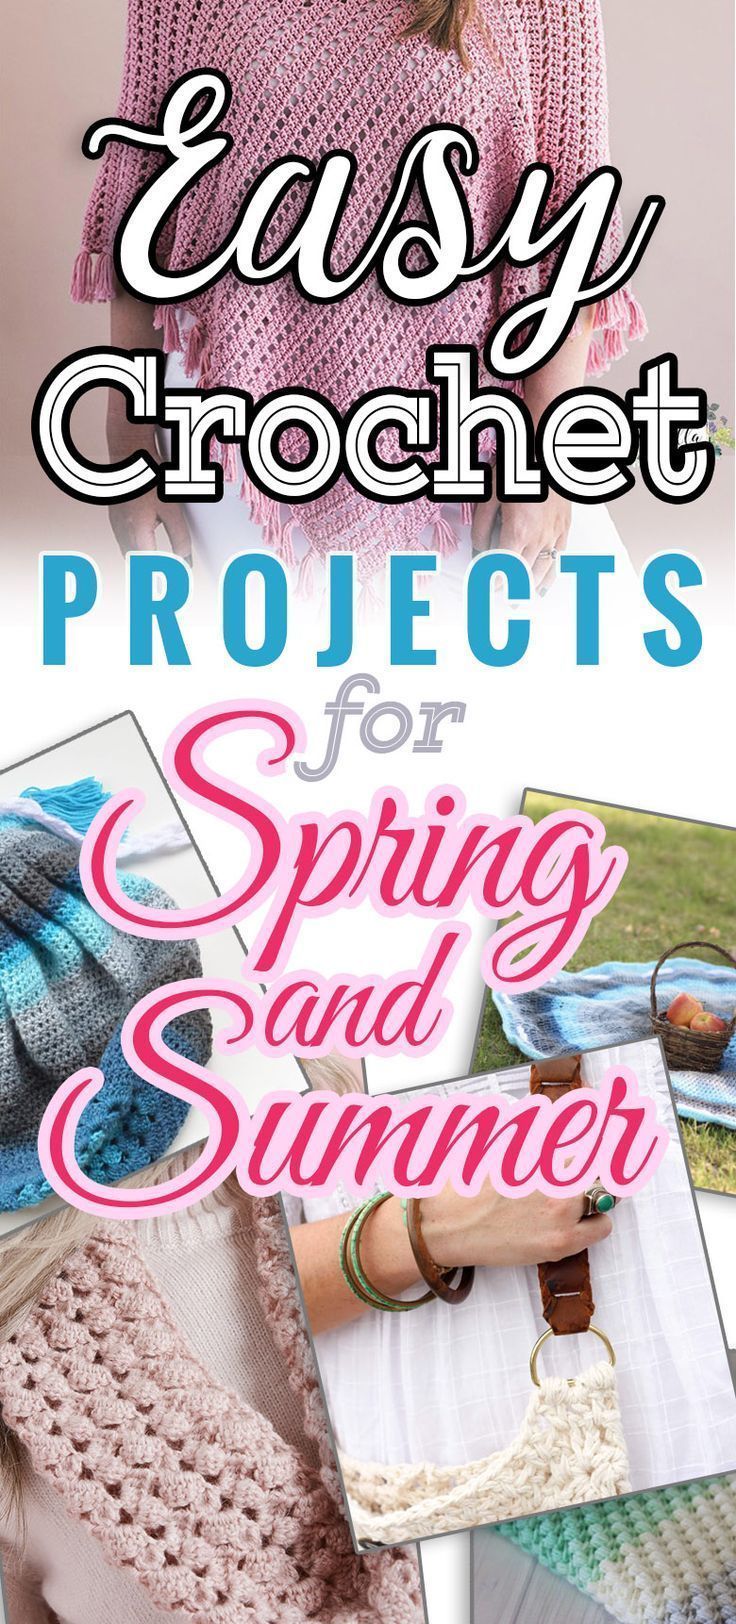 Easy Crochet Projects for Spring and Summer -   21 diy projects For Summer crochet patterns
 ideas